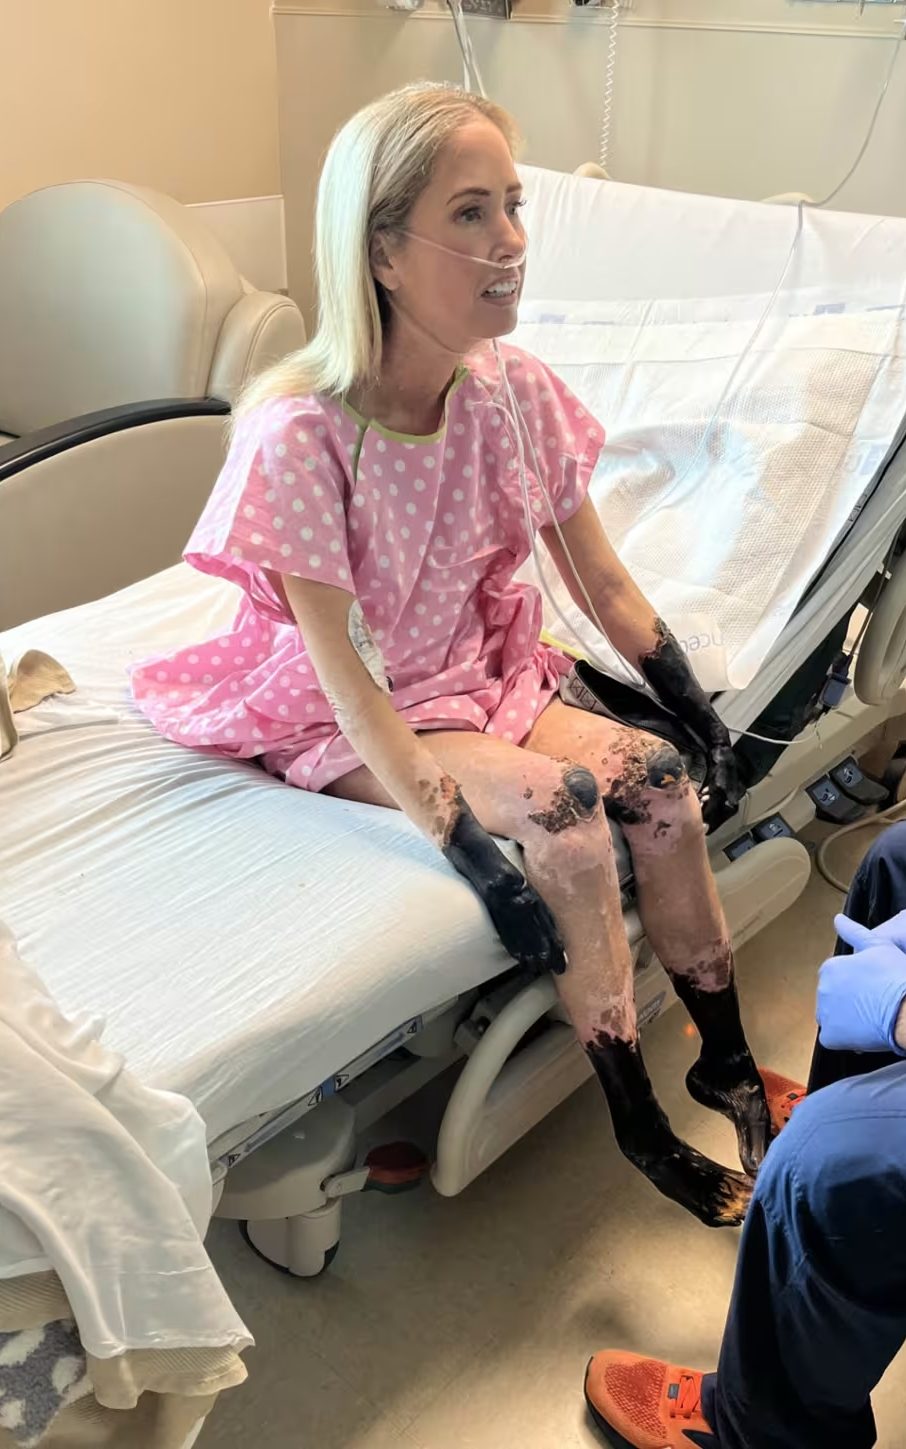 Moody's extremities turned black in the hospital. "The doctor said, 'We're either going to save her life or we're going to save her limbs,'" her husband recalls.